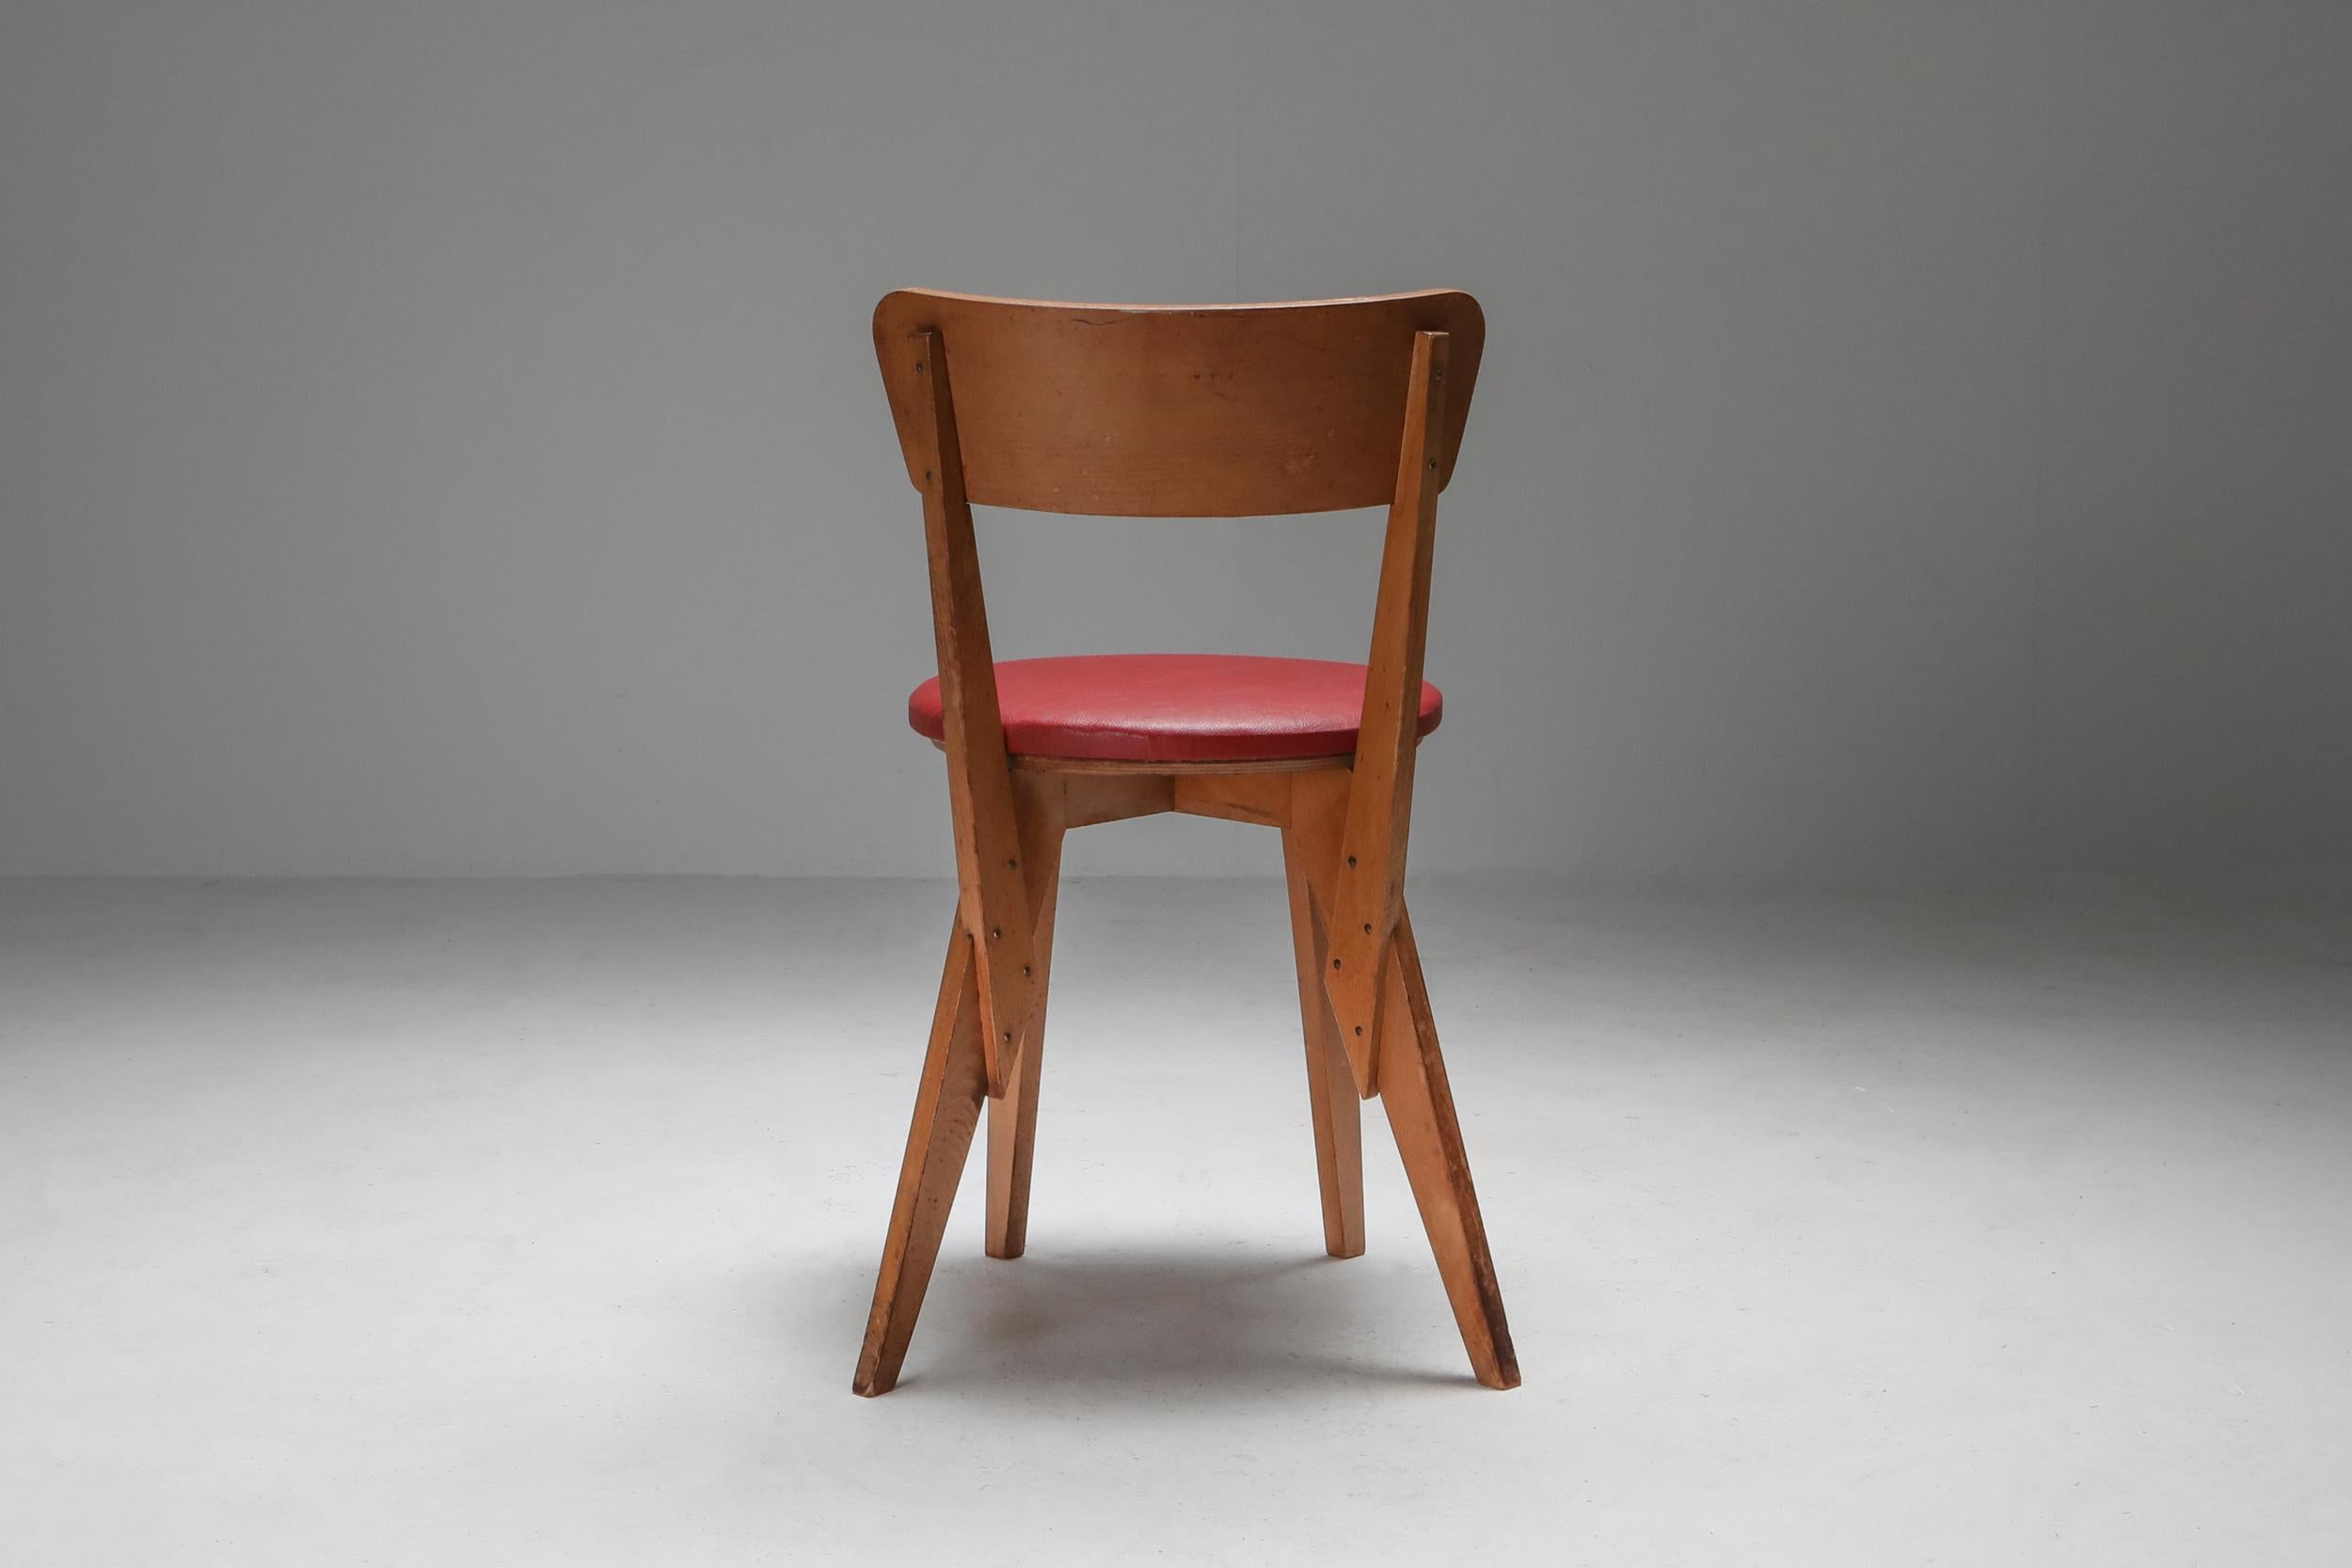 Mid-20th Century Dutch Modernist Chair by Wim Den Boon, 1947 For Sale